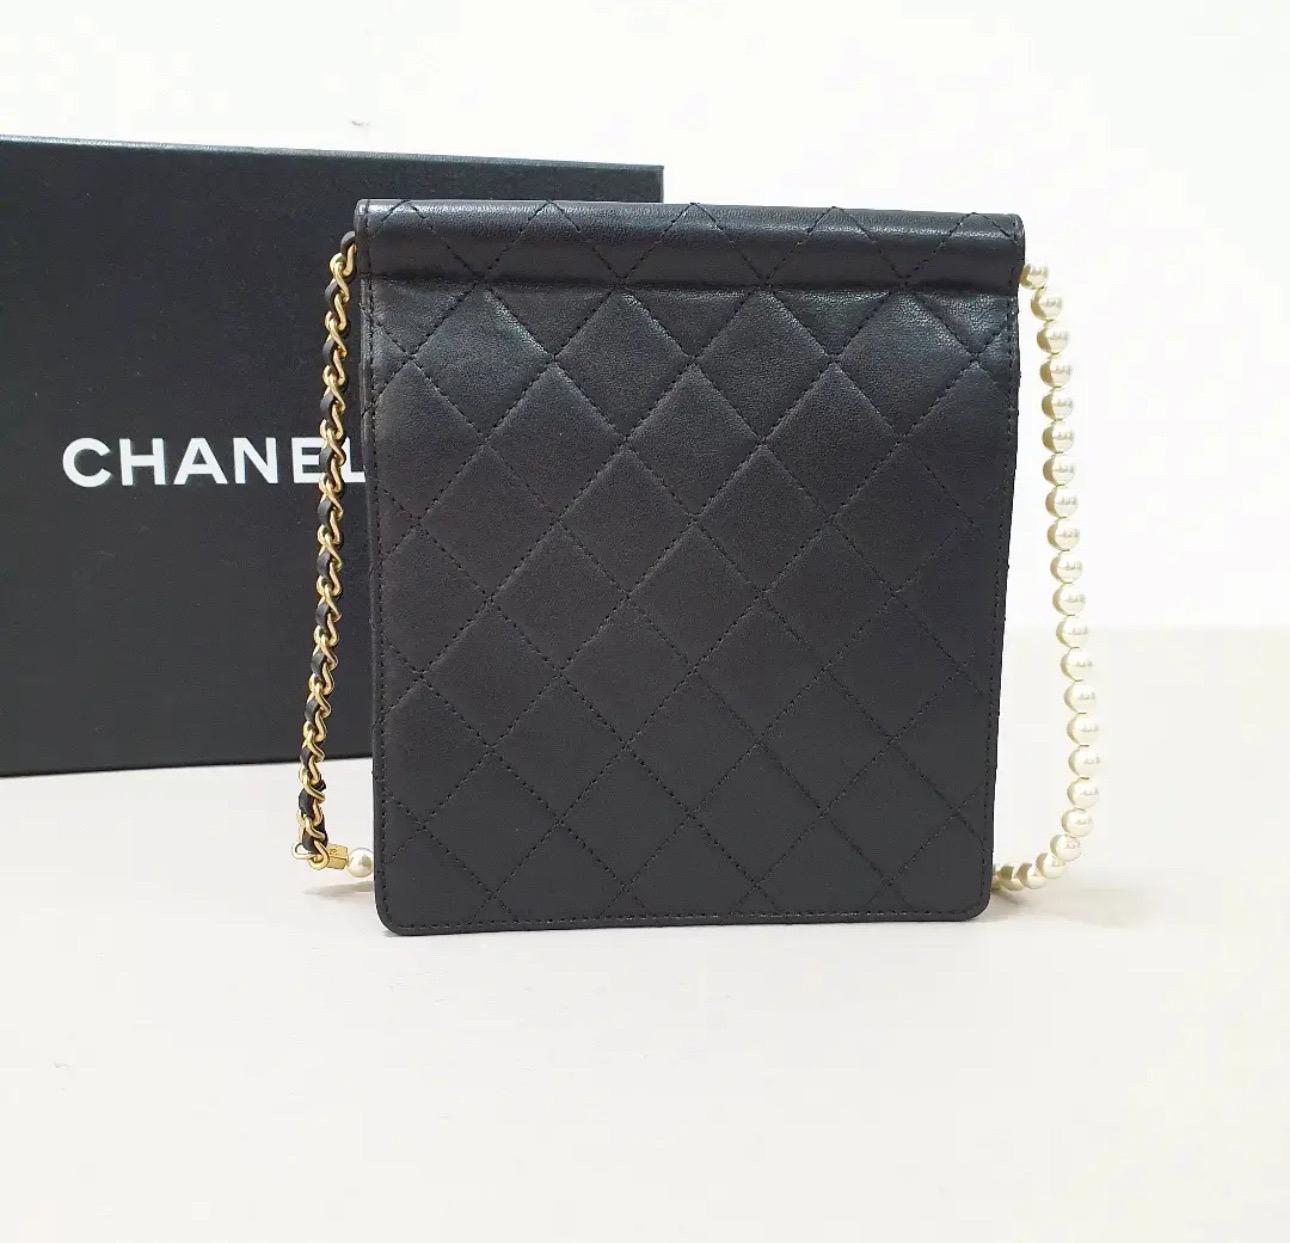 Chanel Black Small Chic Pearls Flap Bag In Good Condition For Sale In Krakow, PL